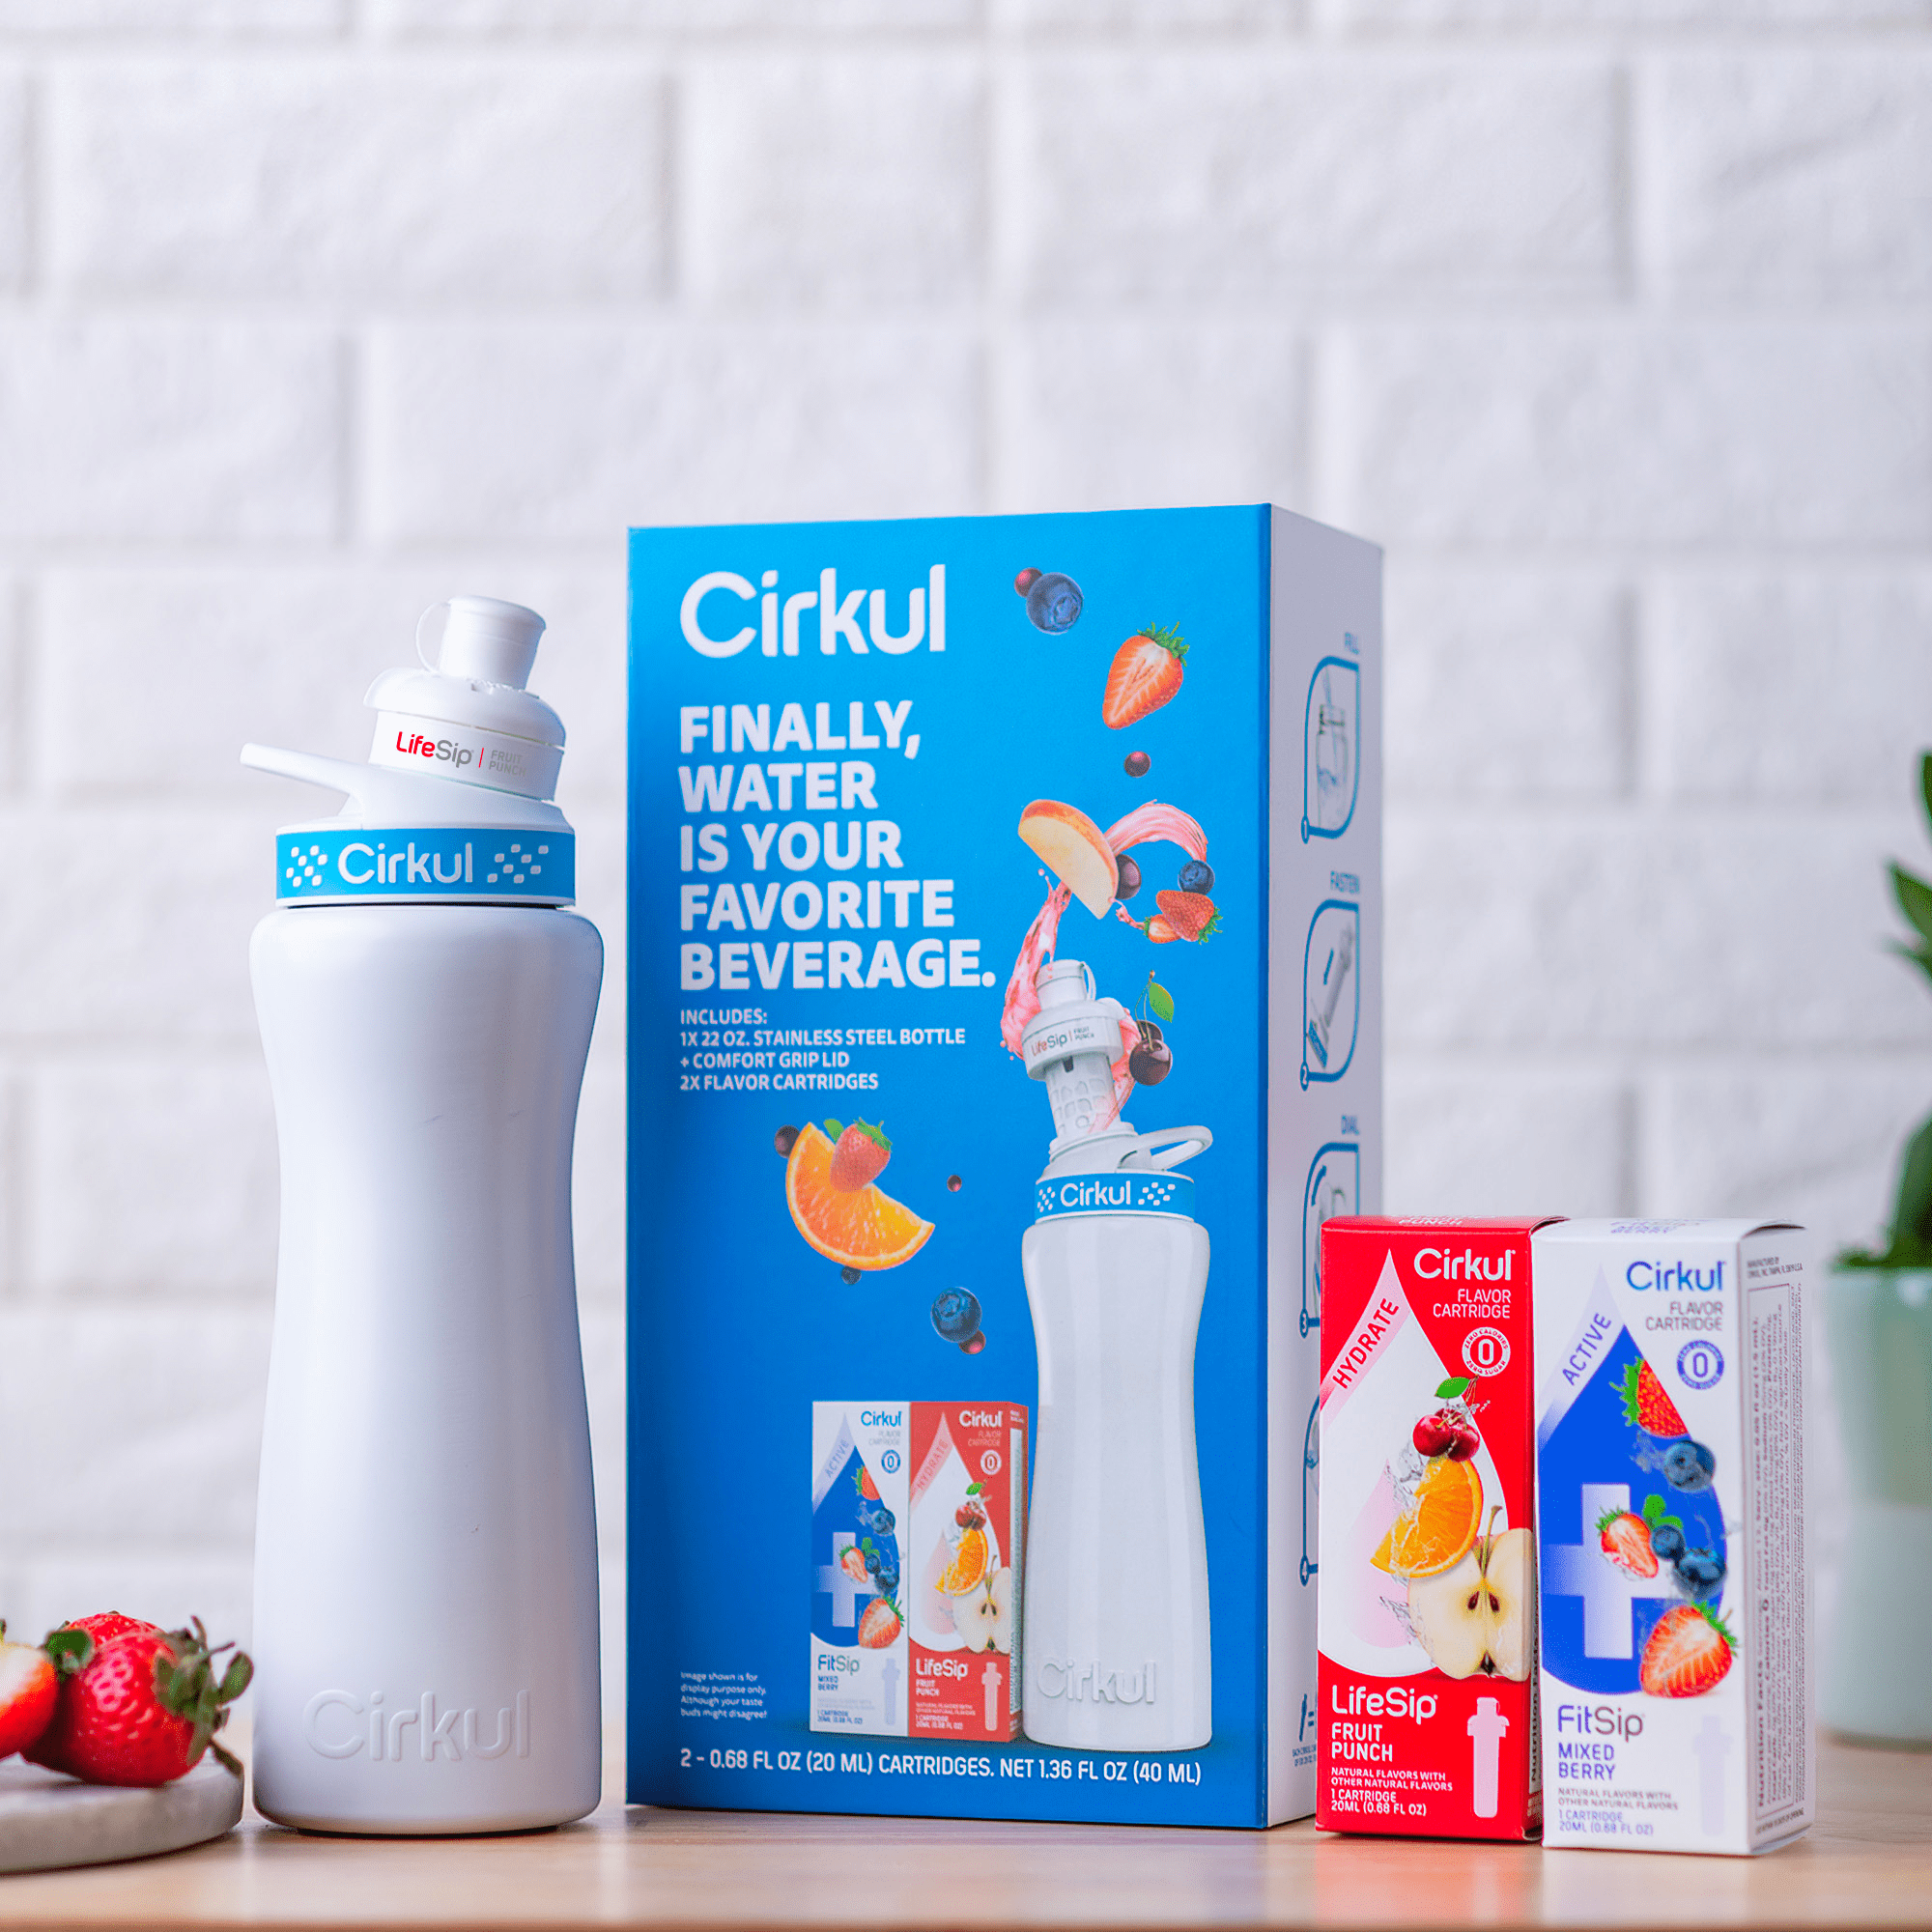 Cirkul - Metal Bottles are back! Our double-walled